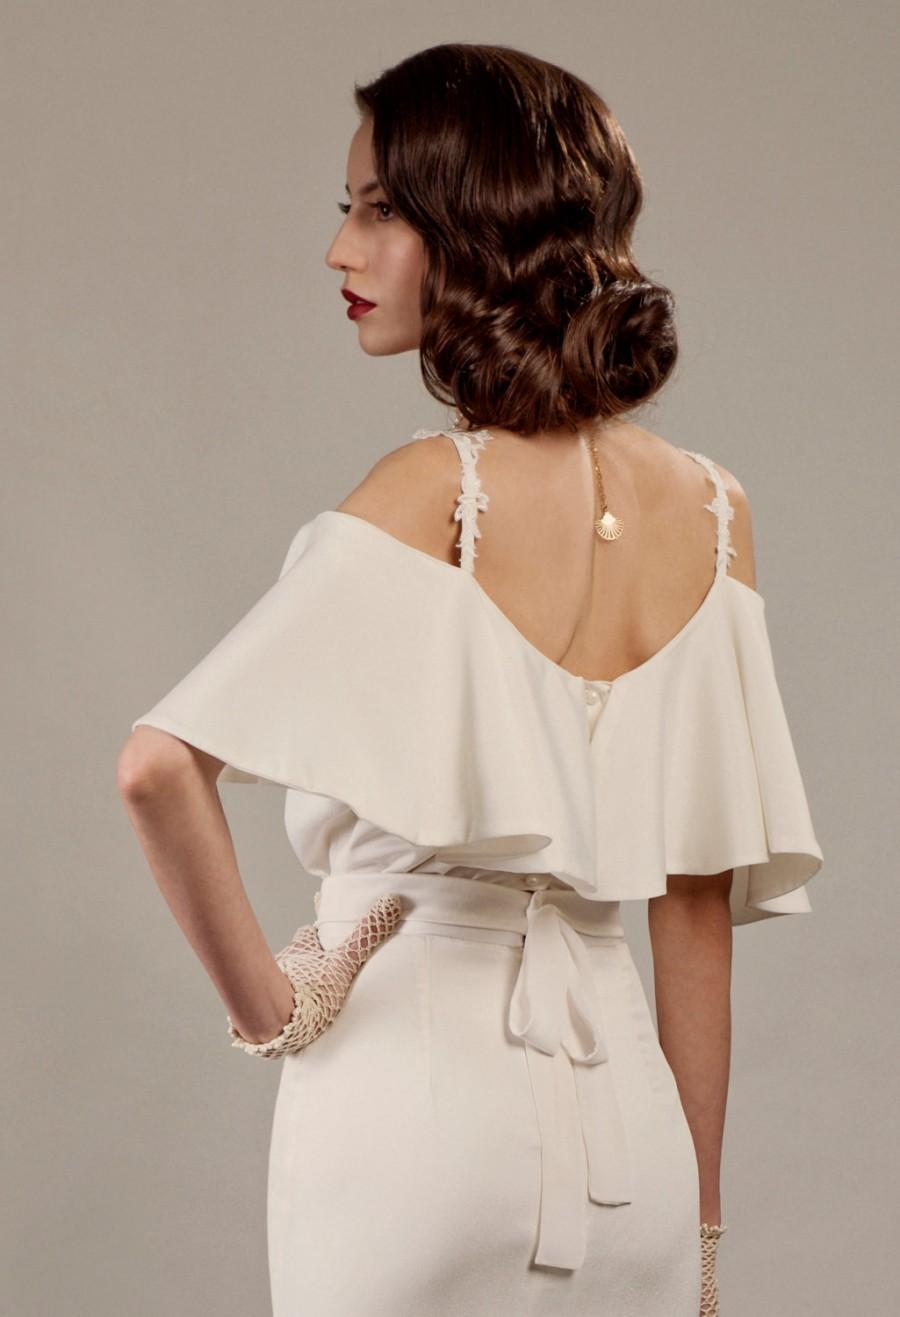 Mariage - Veronica two piece unique wedding dress ensemble in ivory glamorous 30's Hollywood vintage inspired